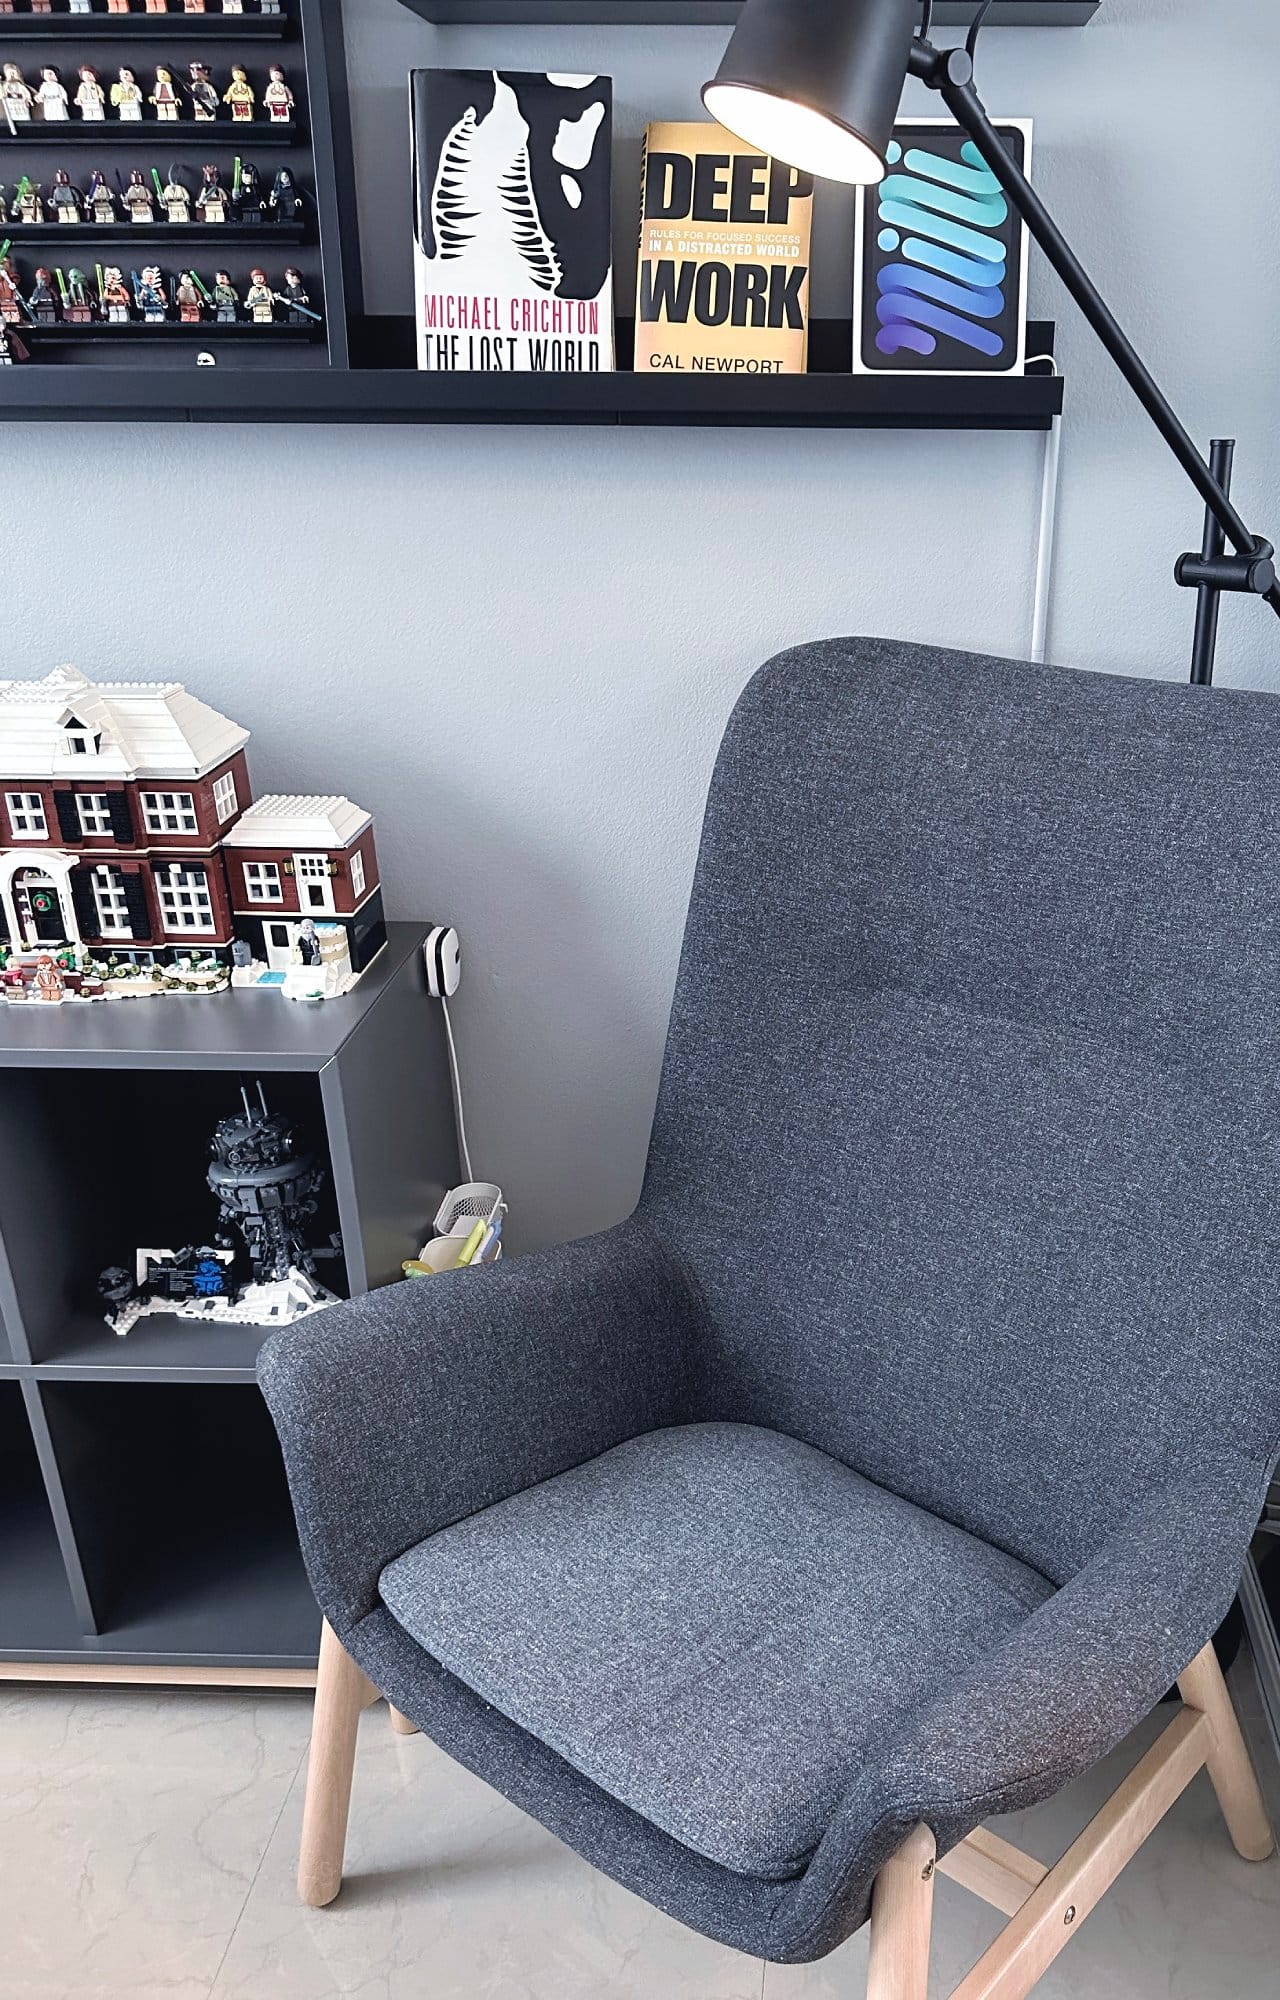 An IKEA VEDBO high-back armchair and some LEGO scenes in the background